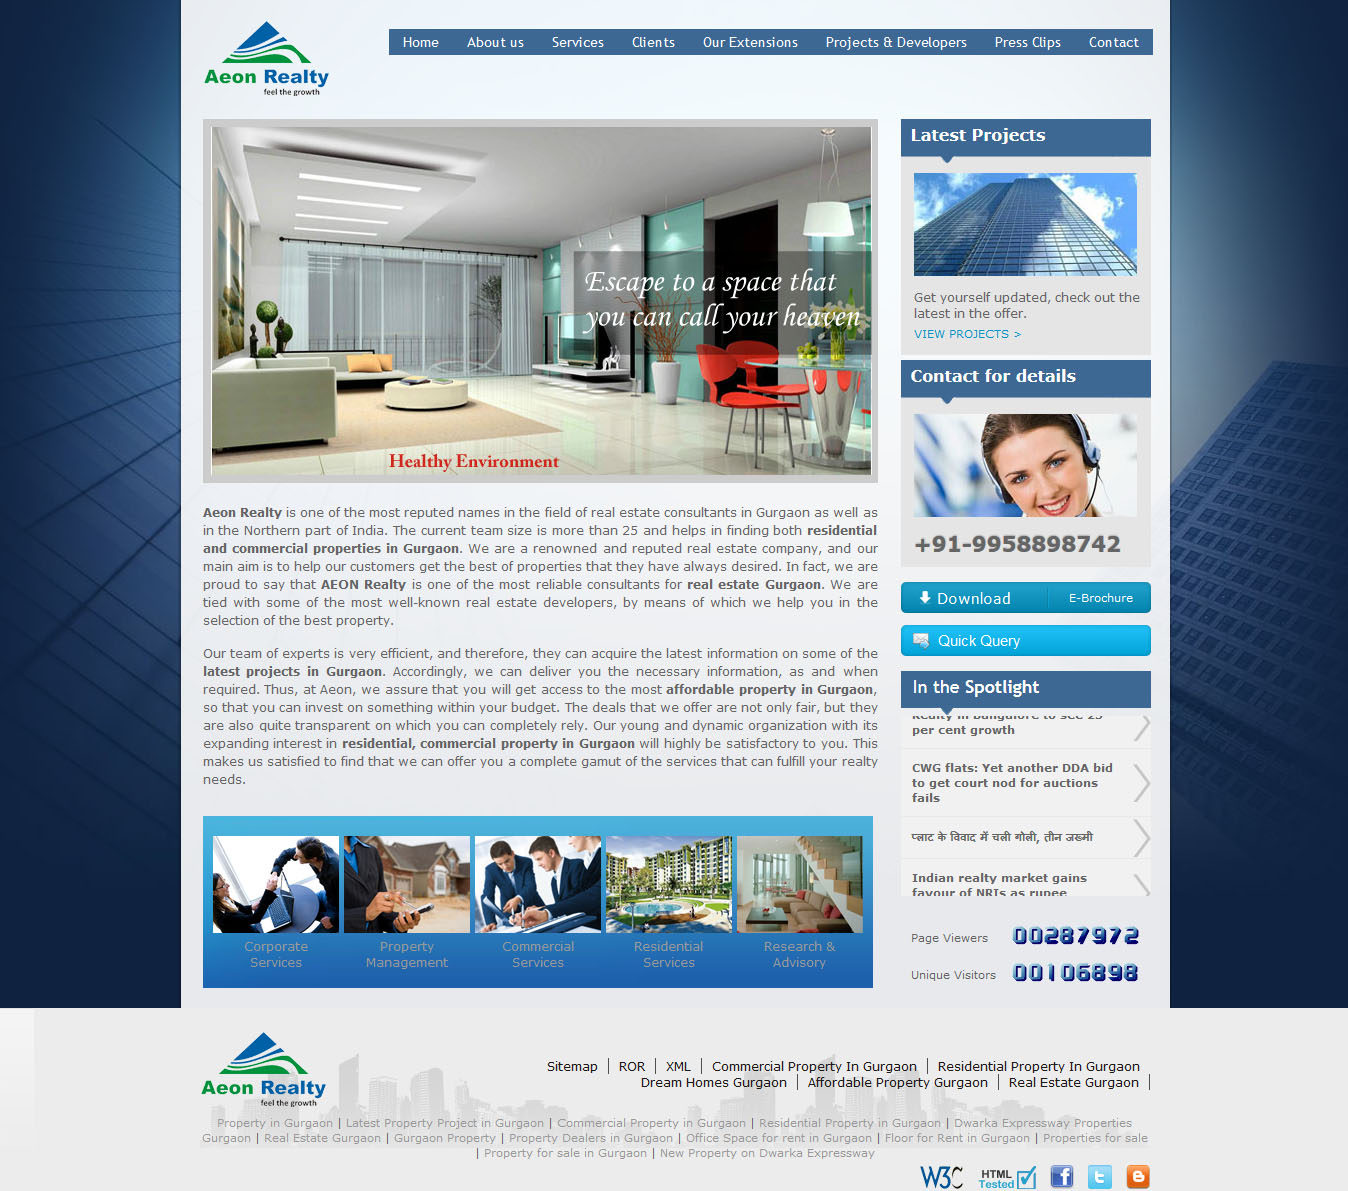 Aeon Realty Website by JustMine